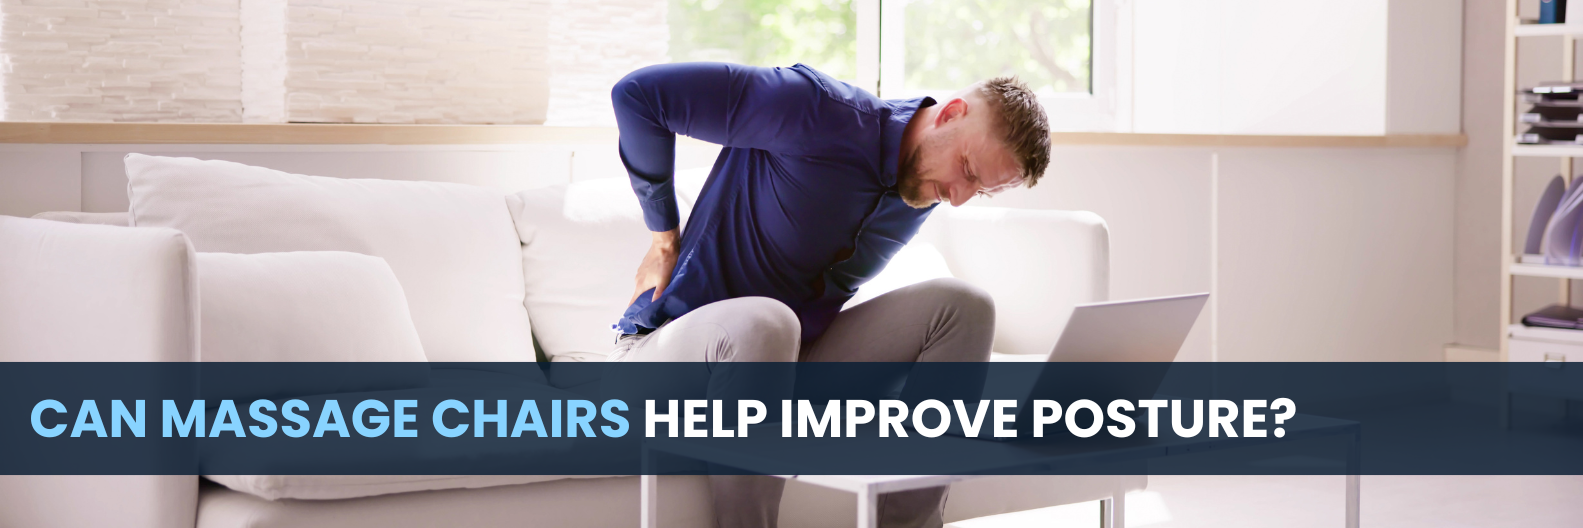 Enhance both posture and well-being with massage chairs. Explore the myriad health advantages they offer, such as stress relief, enhanced circulation, and more!